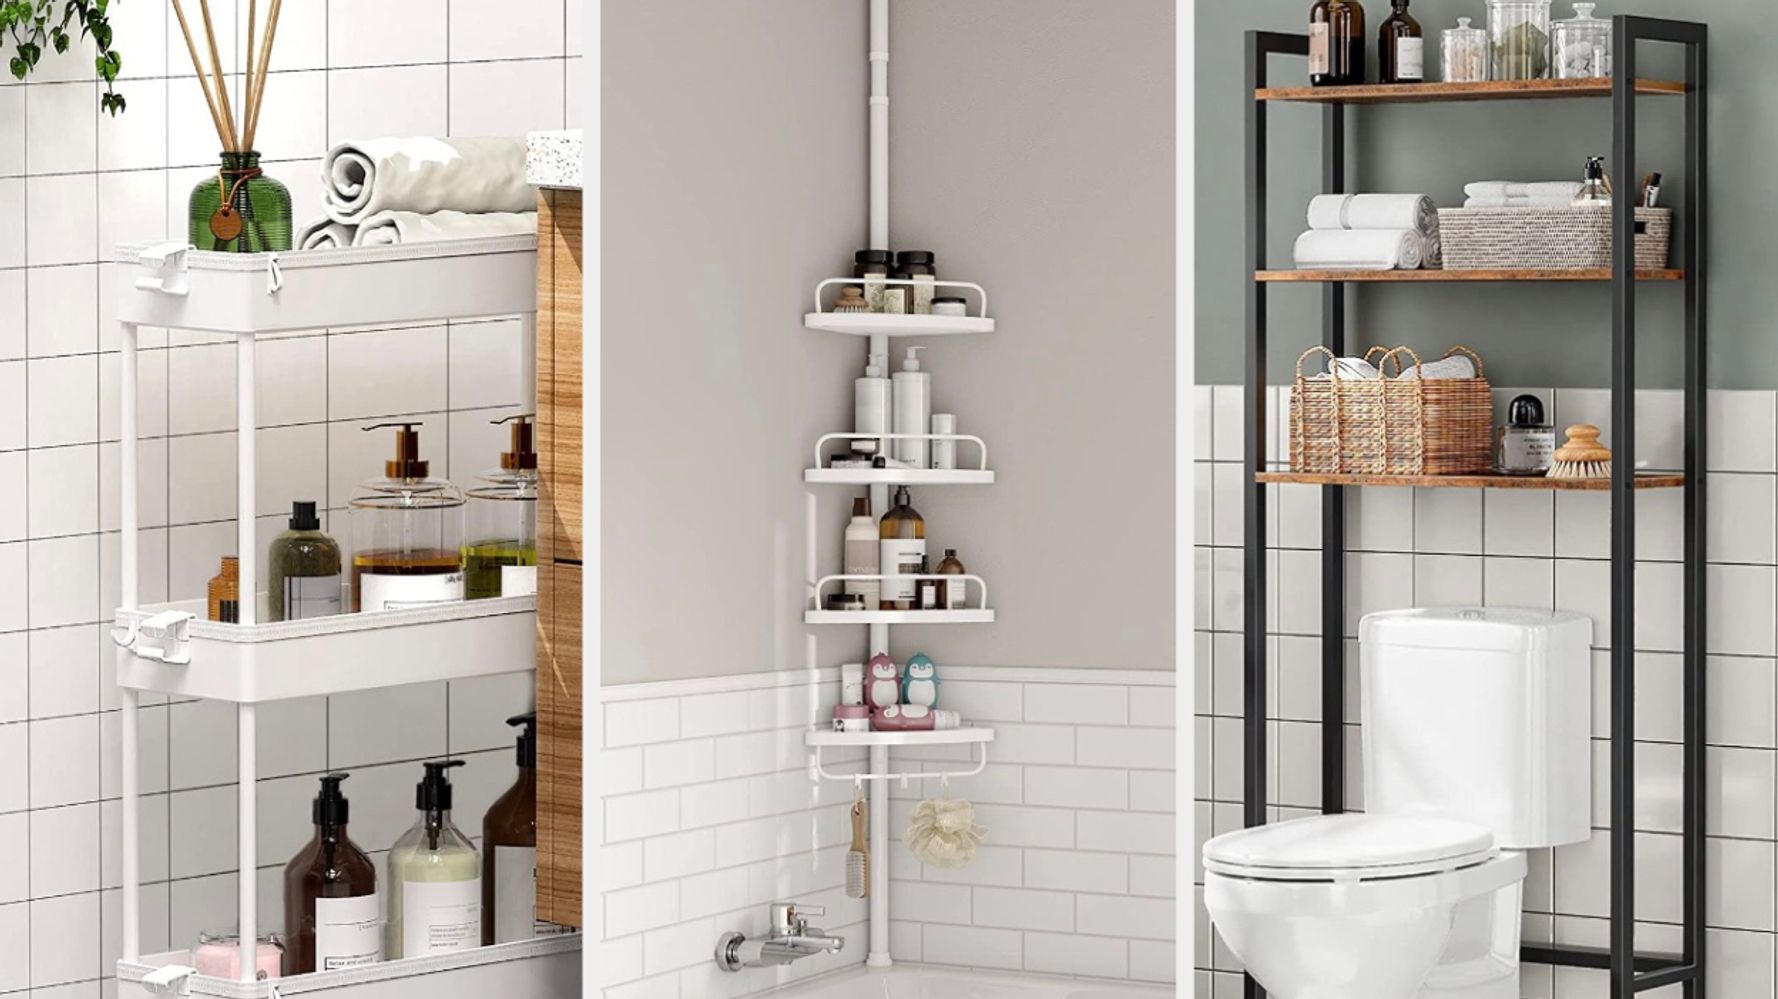 20 Bathroom Storage Solutions That Will Work In Even The Smallest Spaces